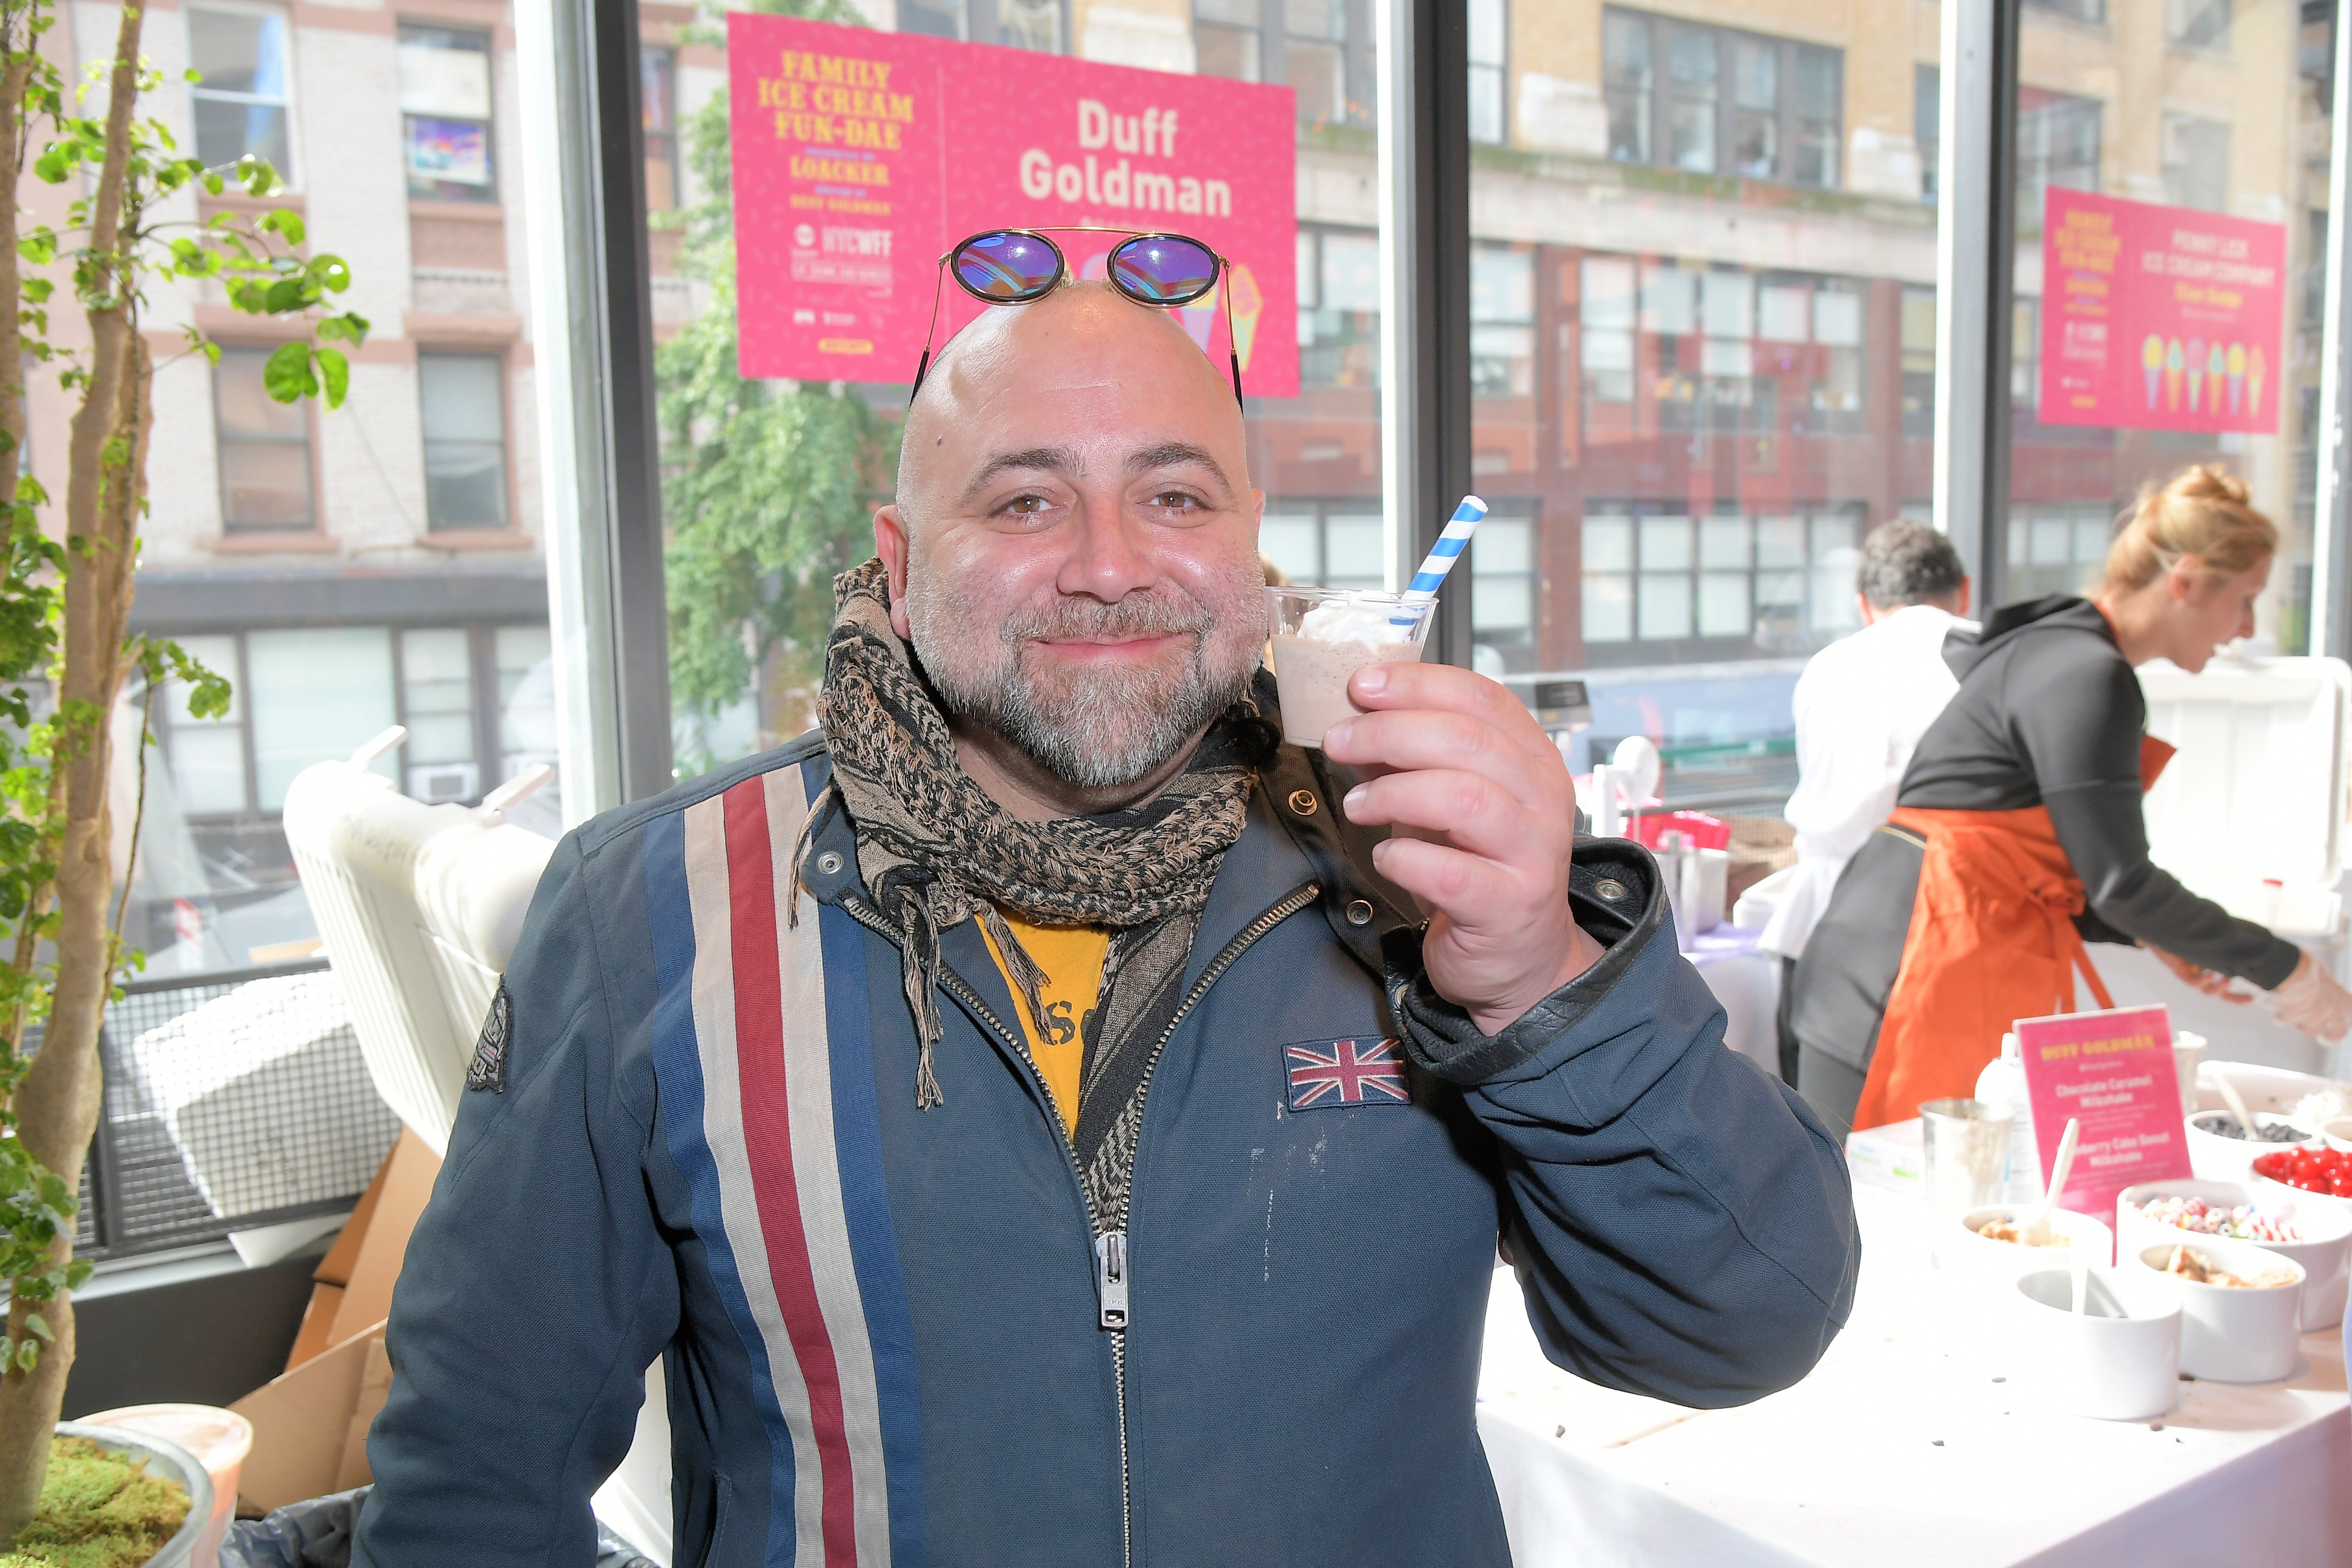 Duff Goldman attends the Wine and Food Festival in New York, October, 2019. | Photo: Getty Images.